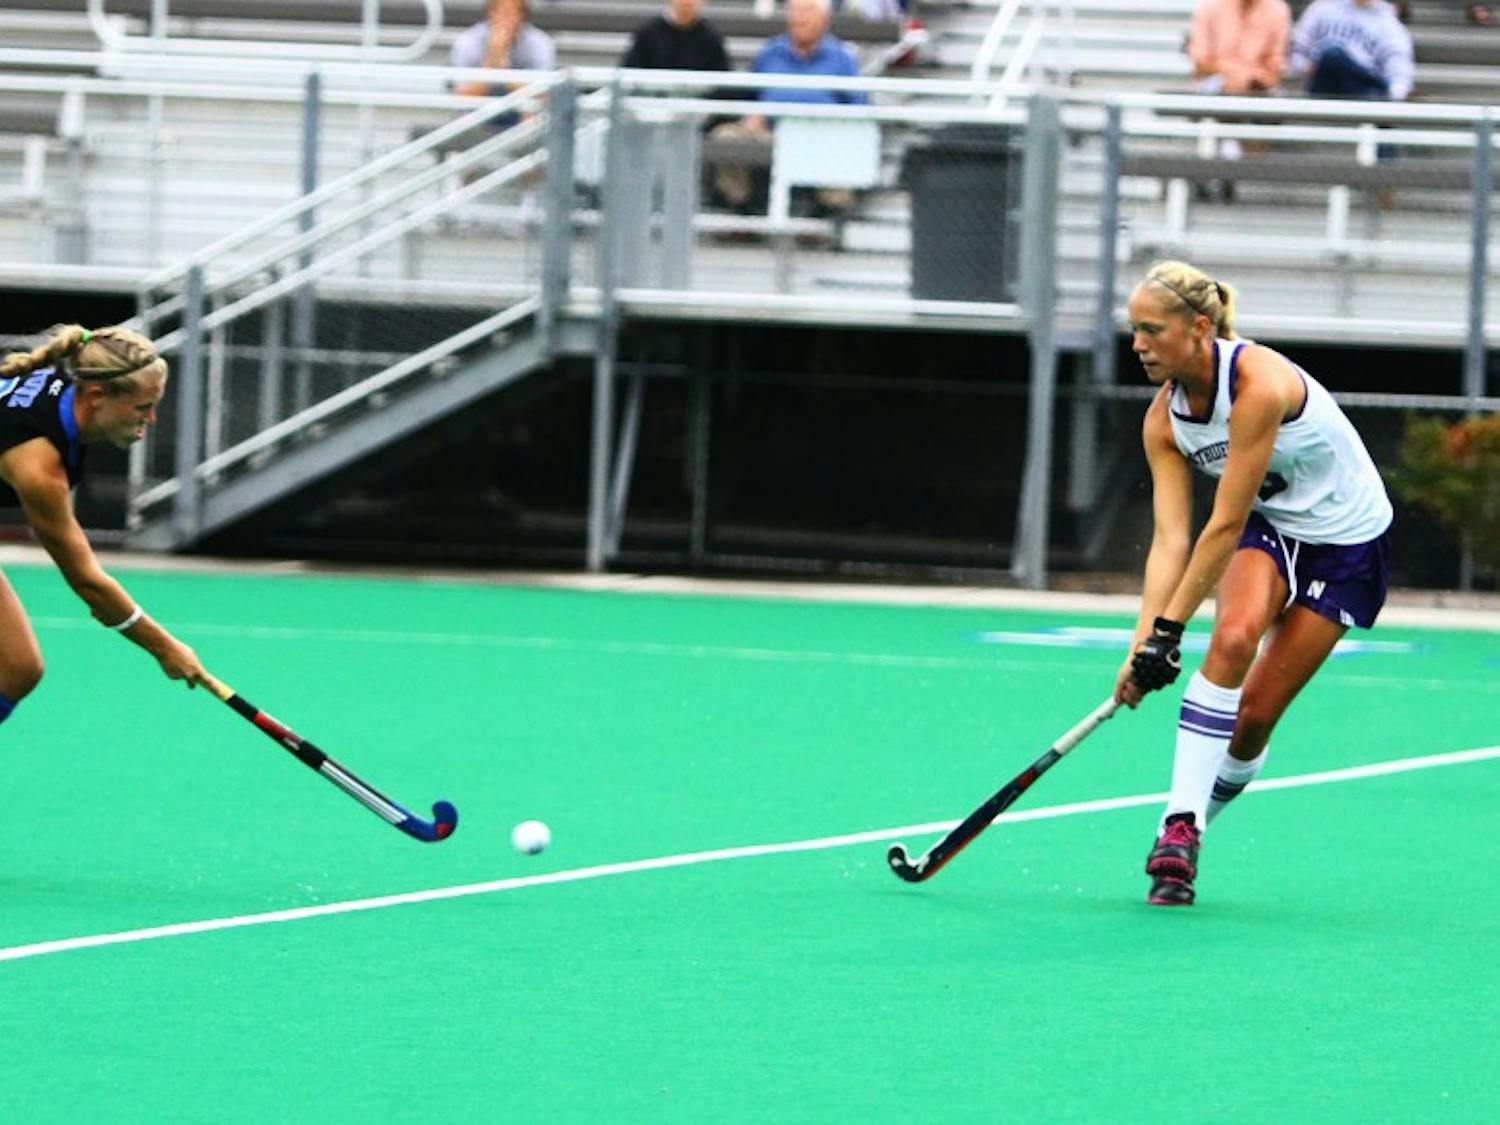 Duke had scored a string of late goals to clinch victories recently, but it was a late goal by Northwestern that sent the Blue Devils home with a loss.